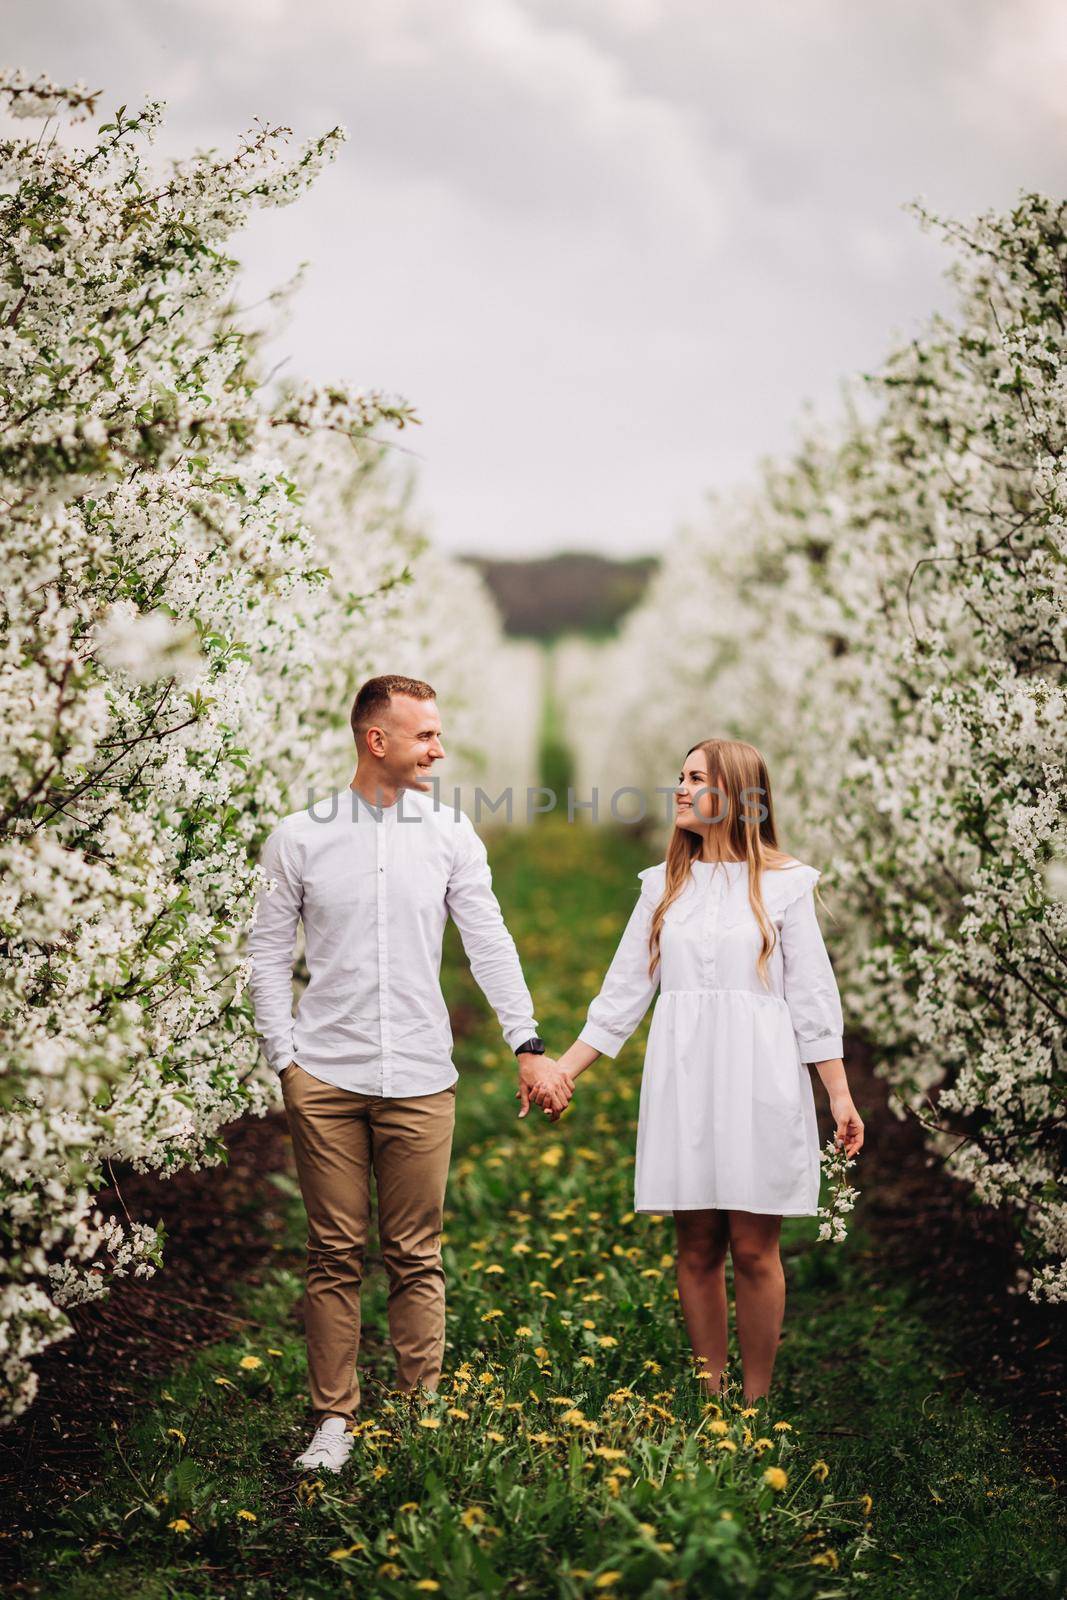 Beautiful young couple in a romantic place, spring blooming apple orchard. Happy joyful couple enjoy each other while walking in the garden. Man holding woman's hand